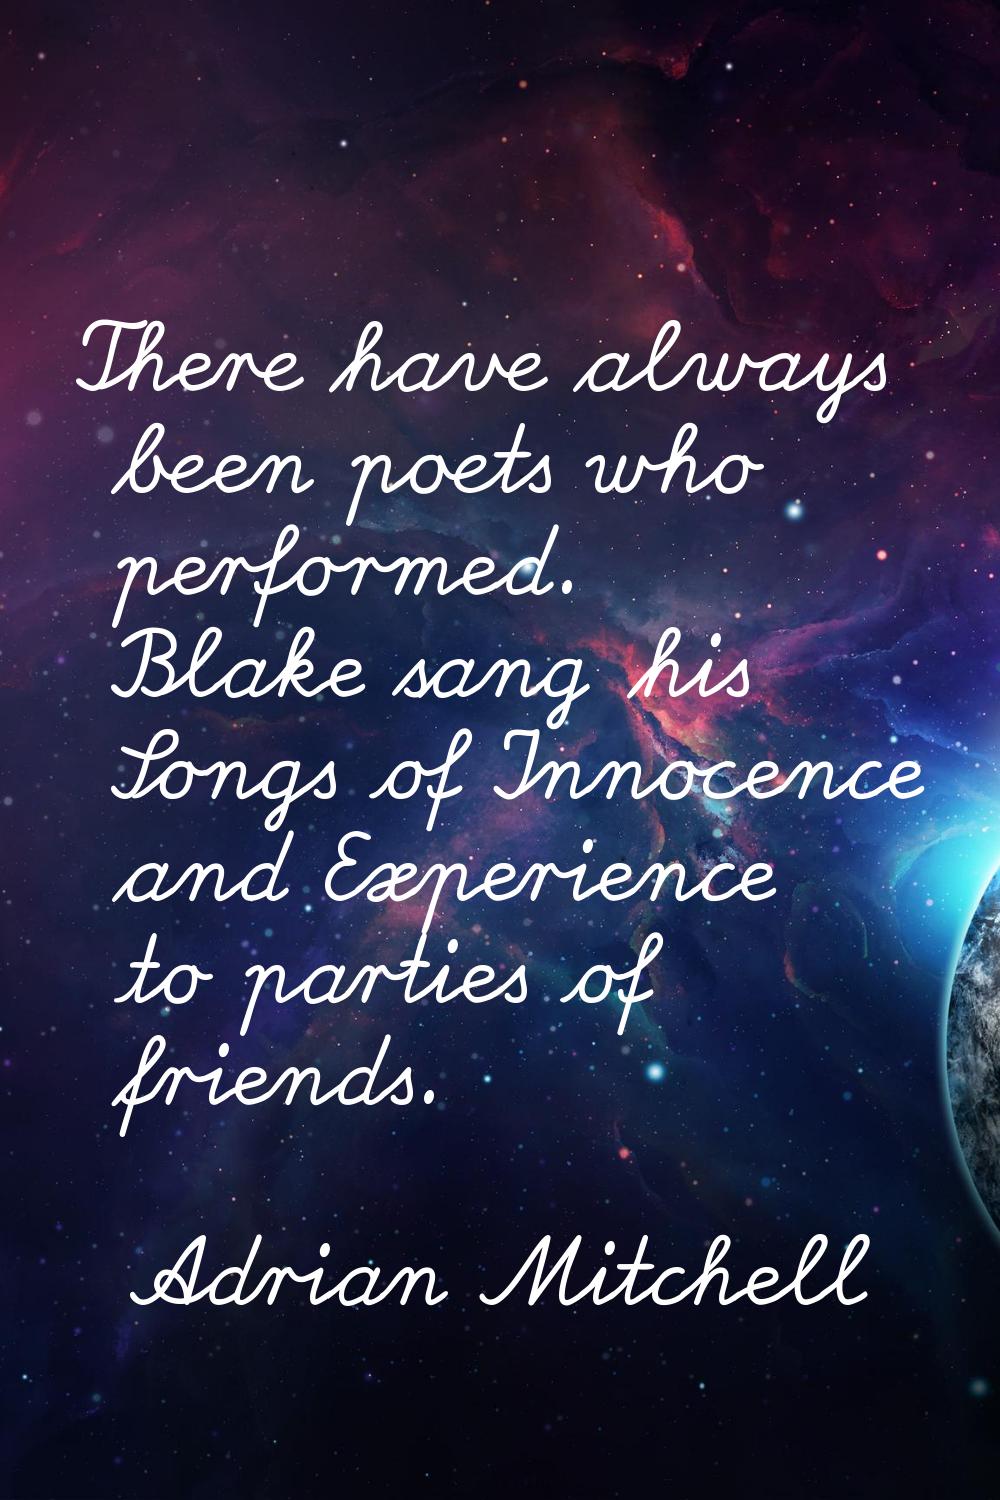 There have always been poets who performed. Blake sang his Songs of Innocence and Experience to par